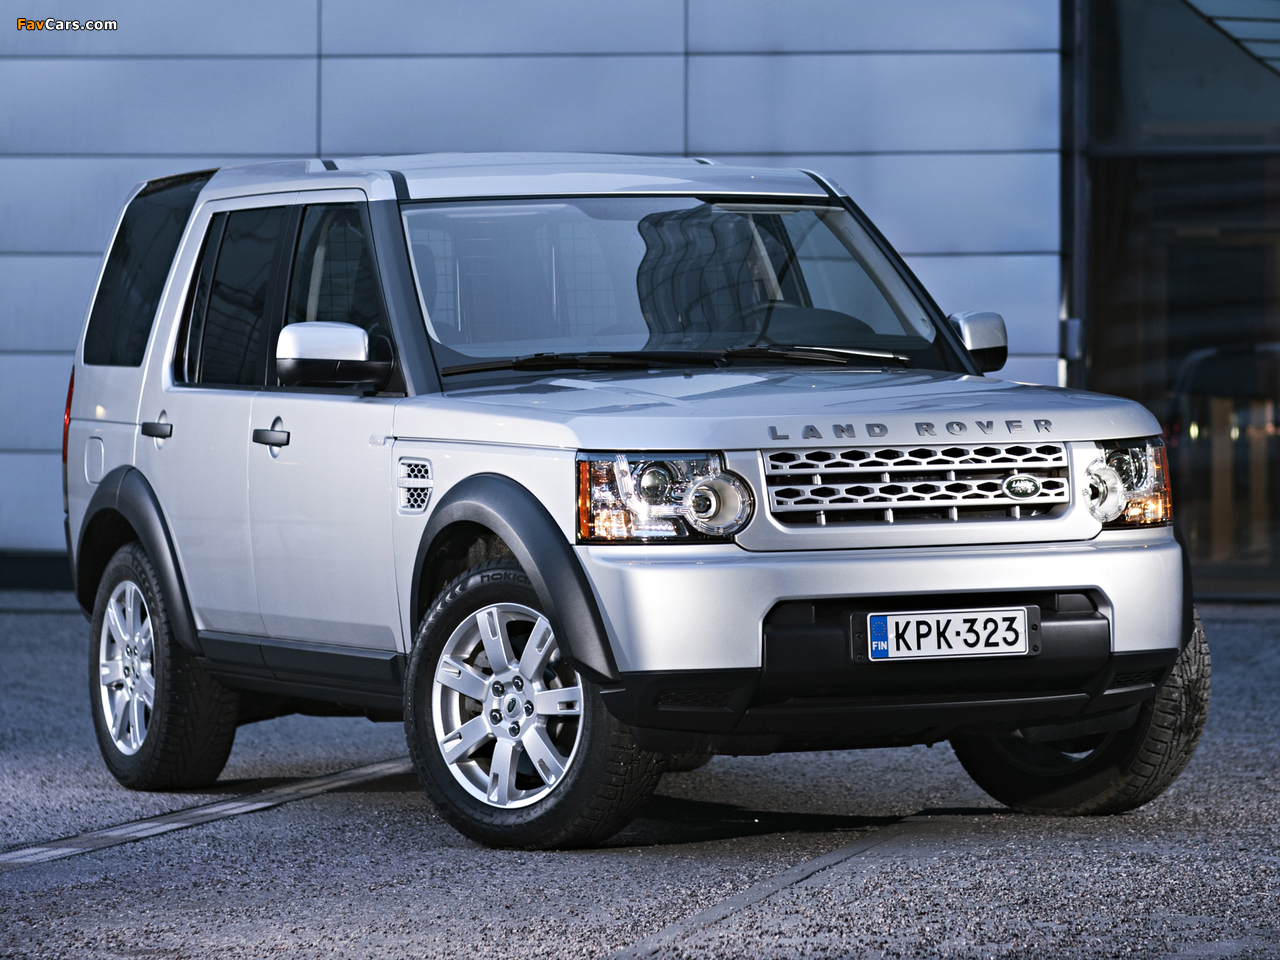 Pictures of Land Rover Discovery 4 SDV6 HSE 200913 (1280x960)